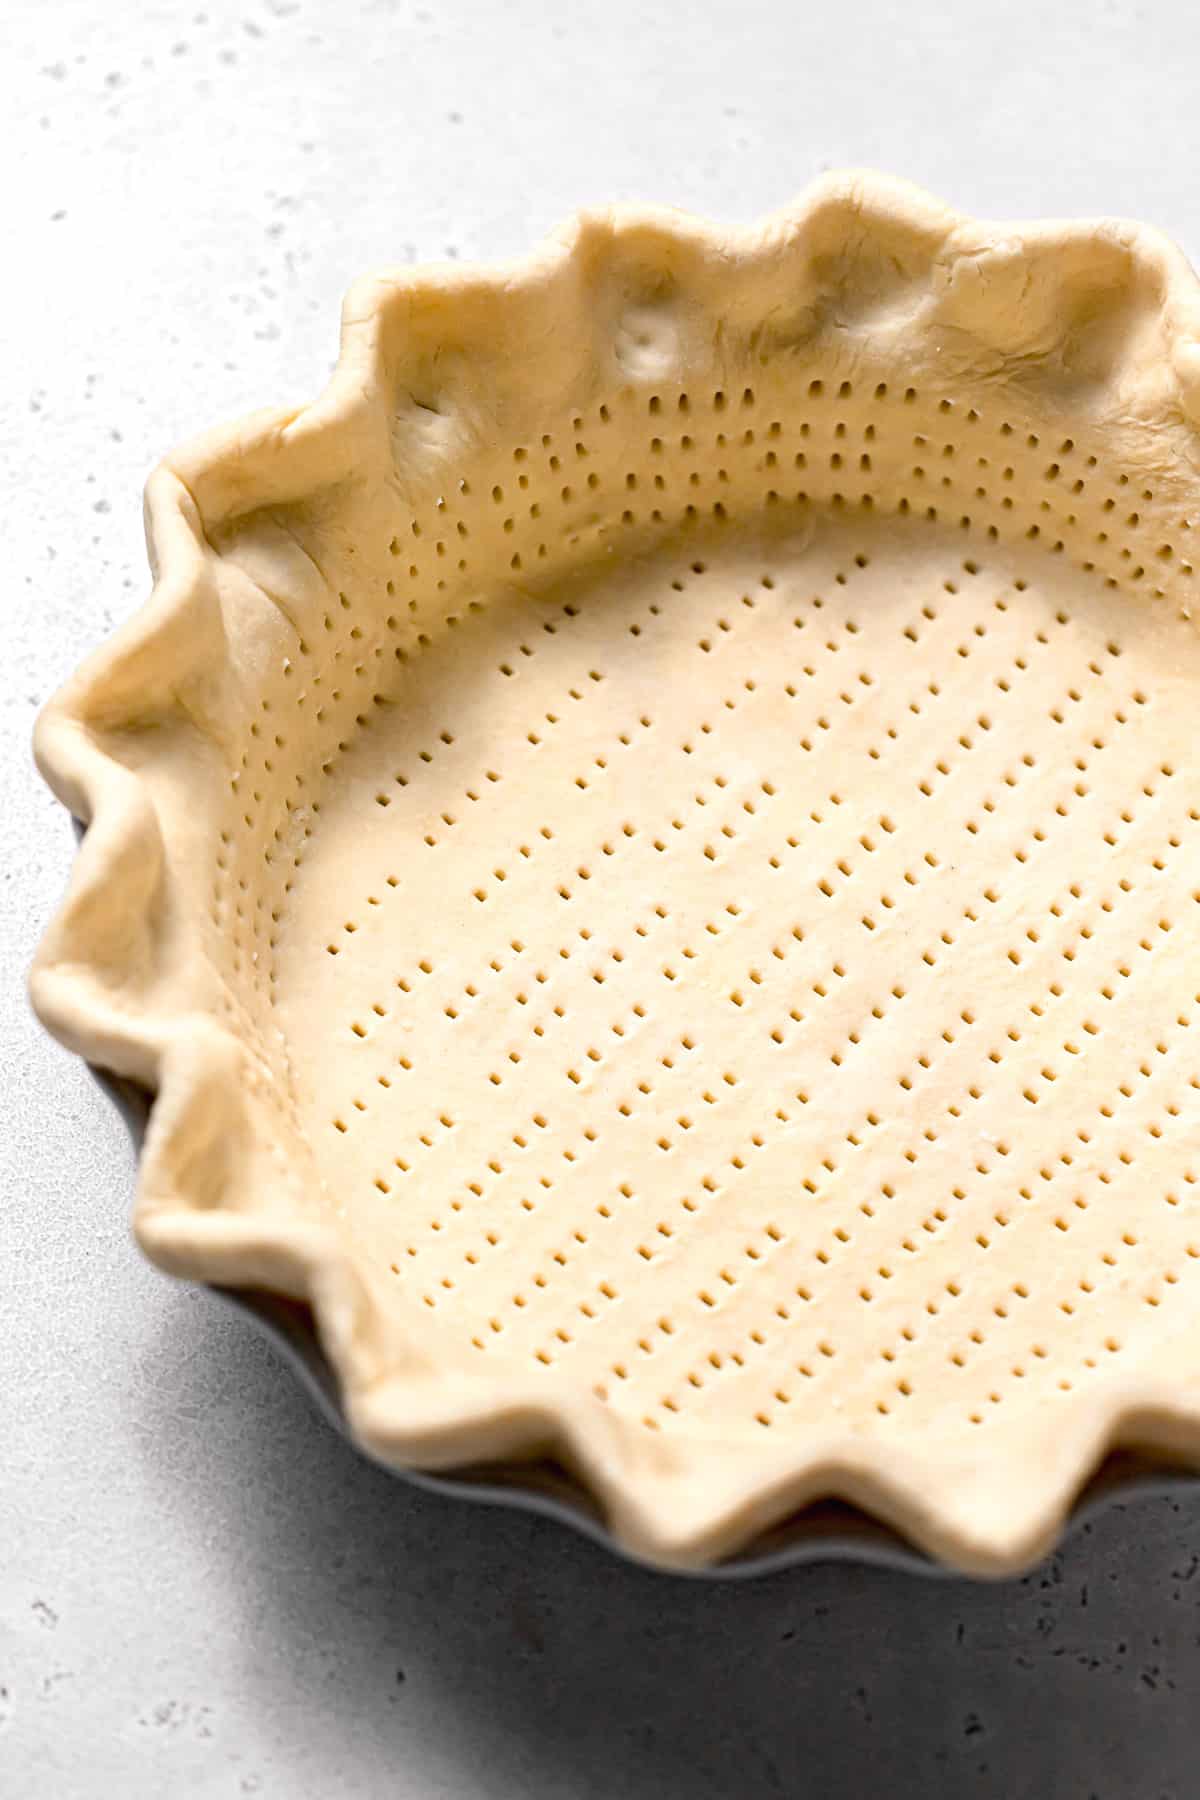 crimped and docked pie dough in pie dish.